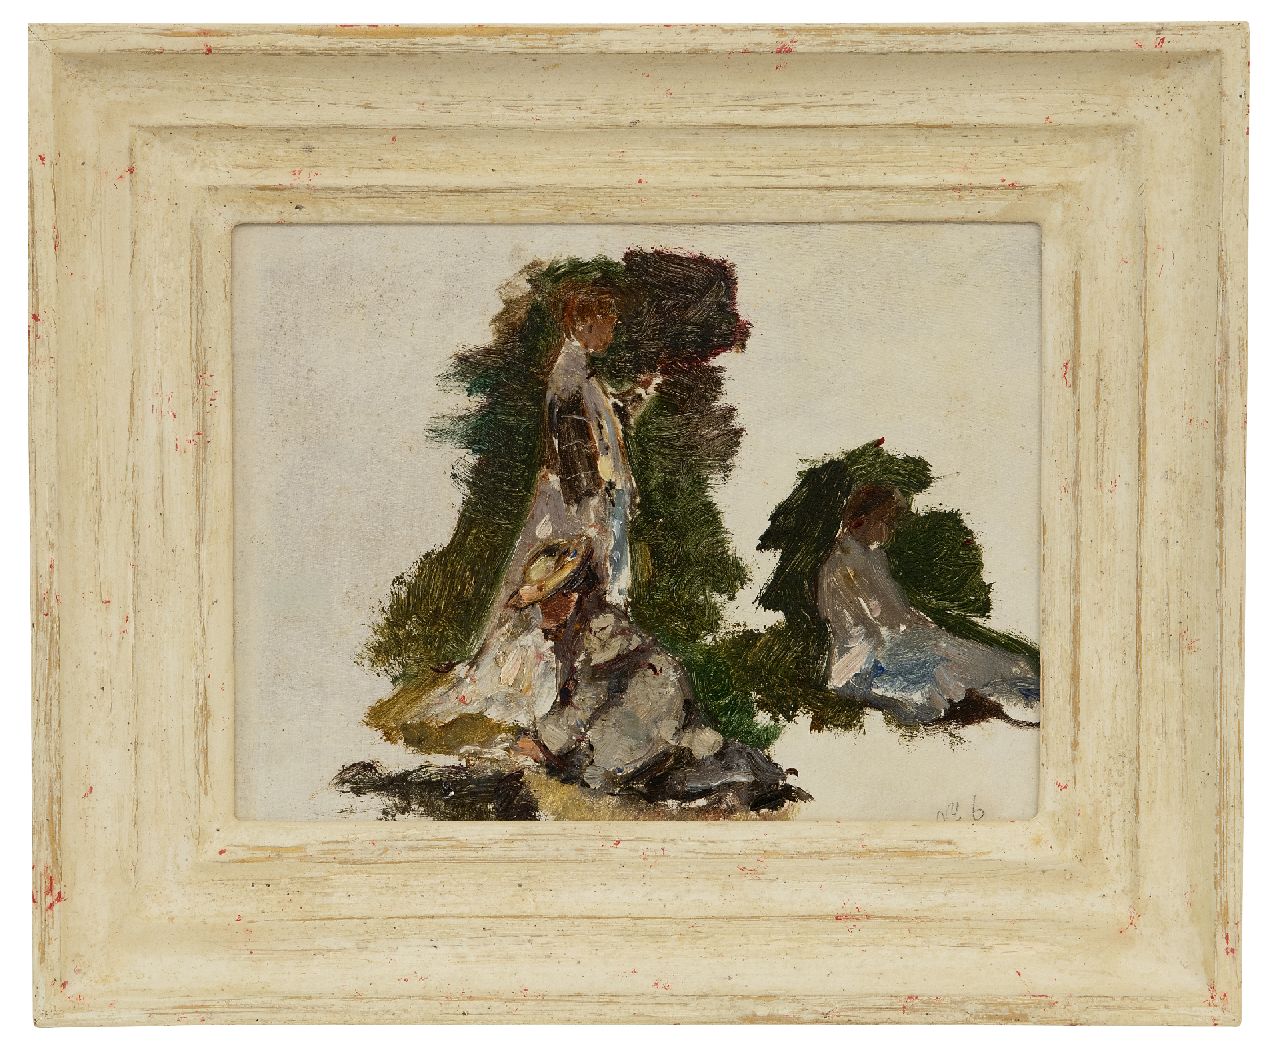 Roelofs O.W.A.  | Otto Willem Albertus 'Albert' Roelofs | Paintings offered for sale | Oil study of figures and a playing child, oil on panel 16.9 x 22.4 cm